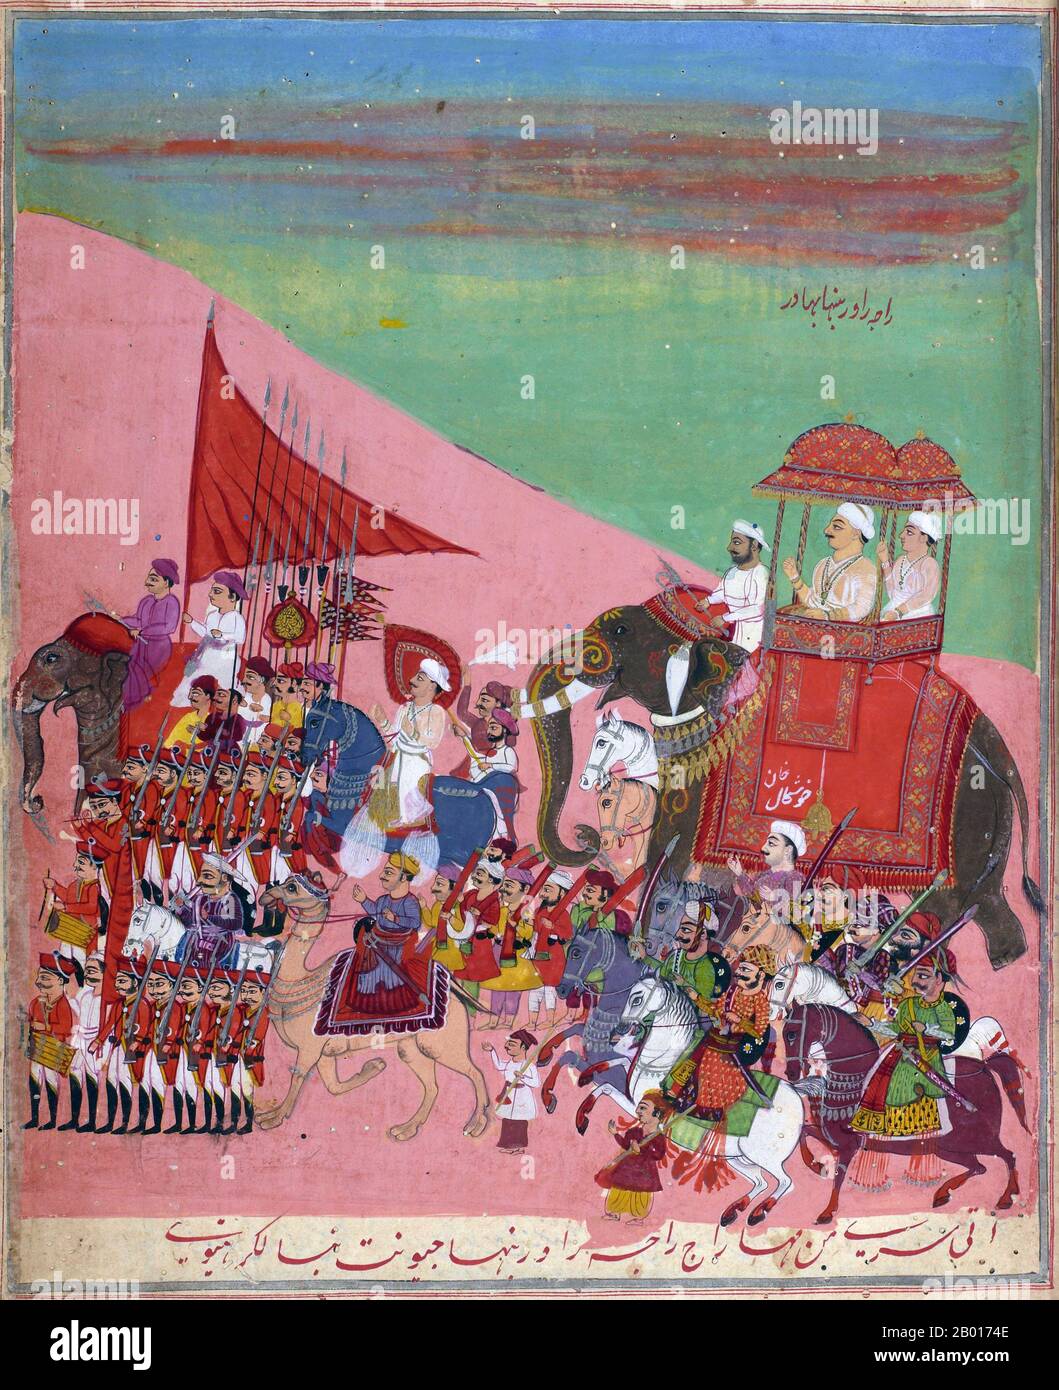 India: 'Raja Rao Rabanha Bahadur (on elephant), with Khushhal Khan (below), and soldiers, led by an elephant with orange banner'. Ragamala miniature painting, c. 1800.  Ragamala Paintings are a series of illustrative paintings from medieval India based on Ragamala or the 'Garland of Ragas', depicting various Indian musical nodes, Ragas. They stand as a classical example of the amalgamation of art, poetry and classical music in medieval India. Ragamala paintings were created in most schools of Indian painting, starting in the 16th and 17th centuries. Stock Photo